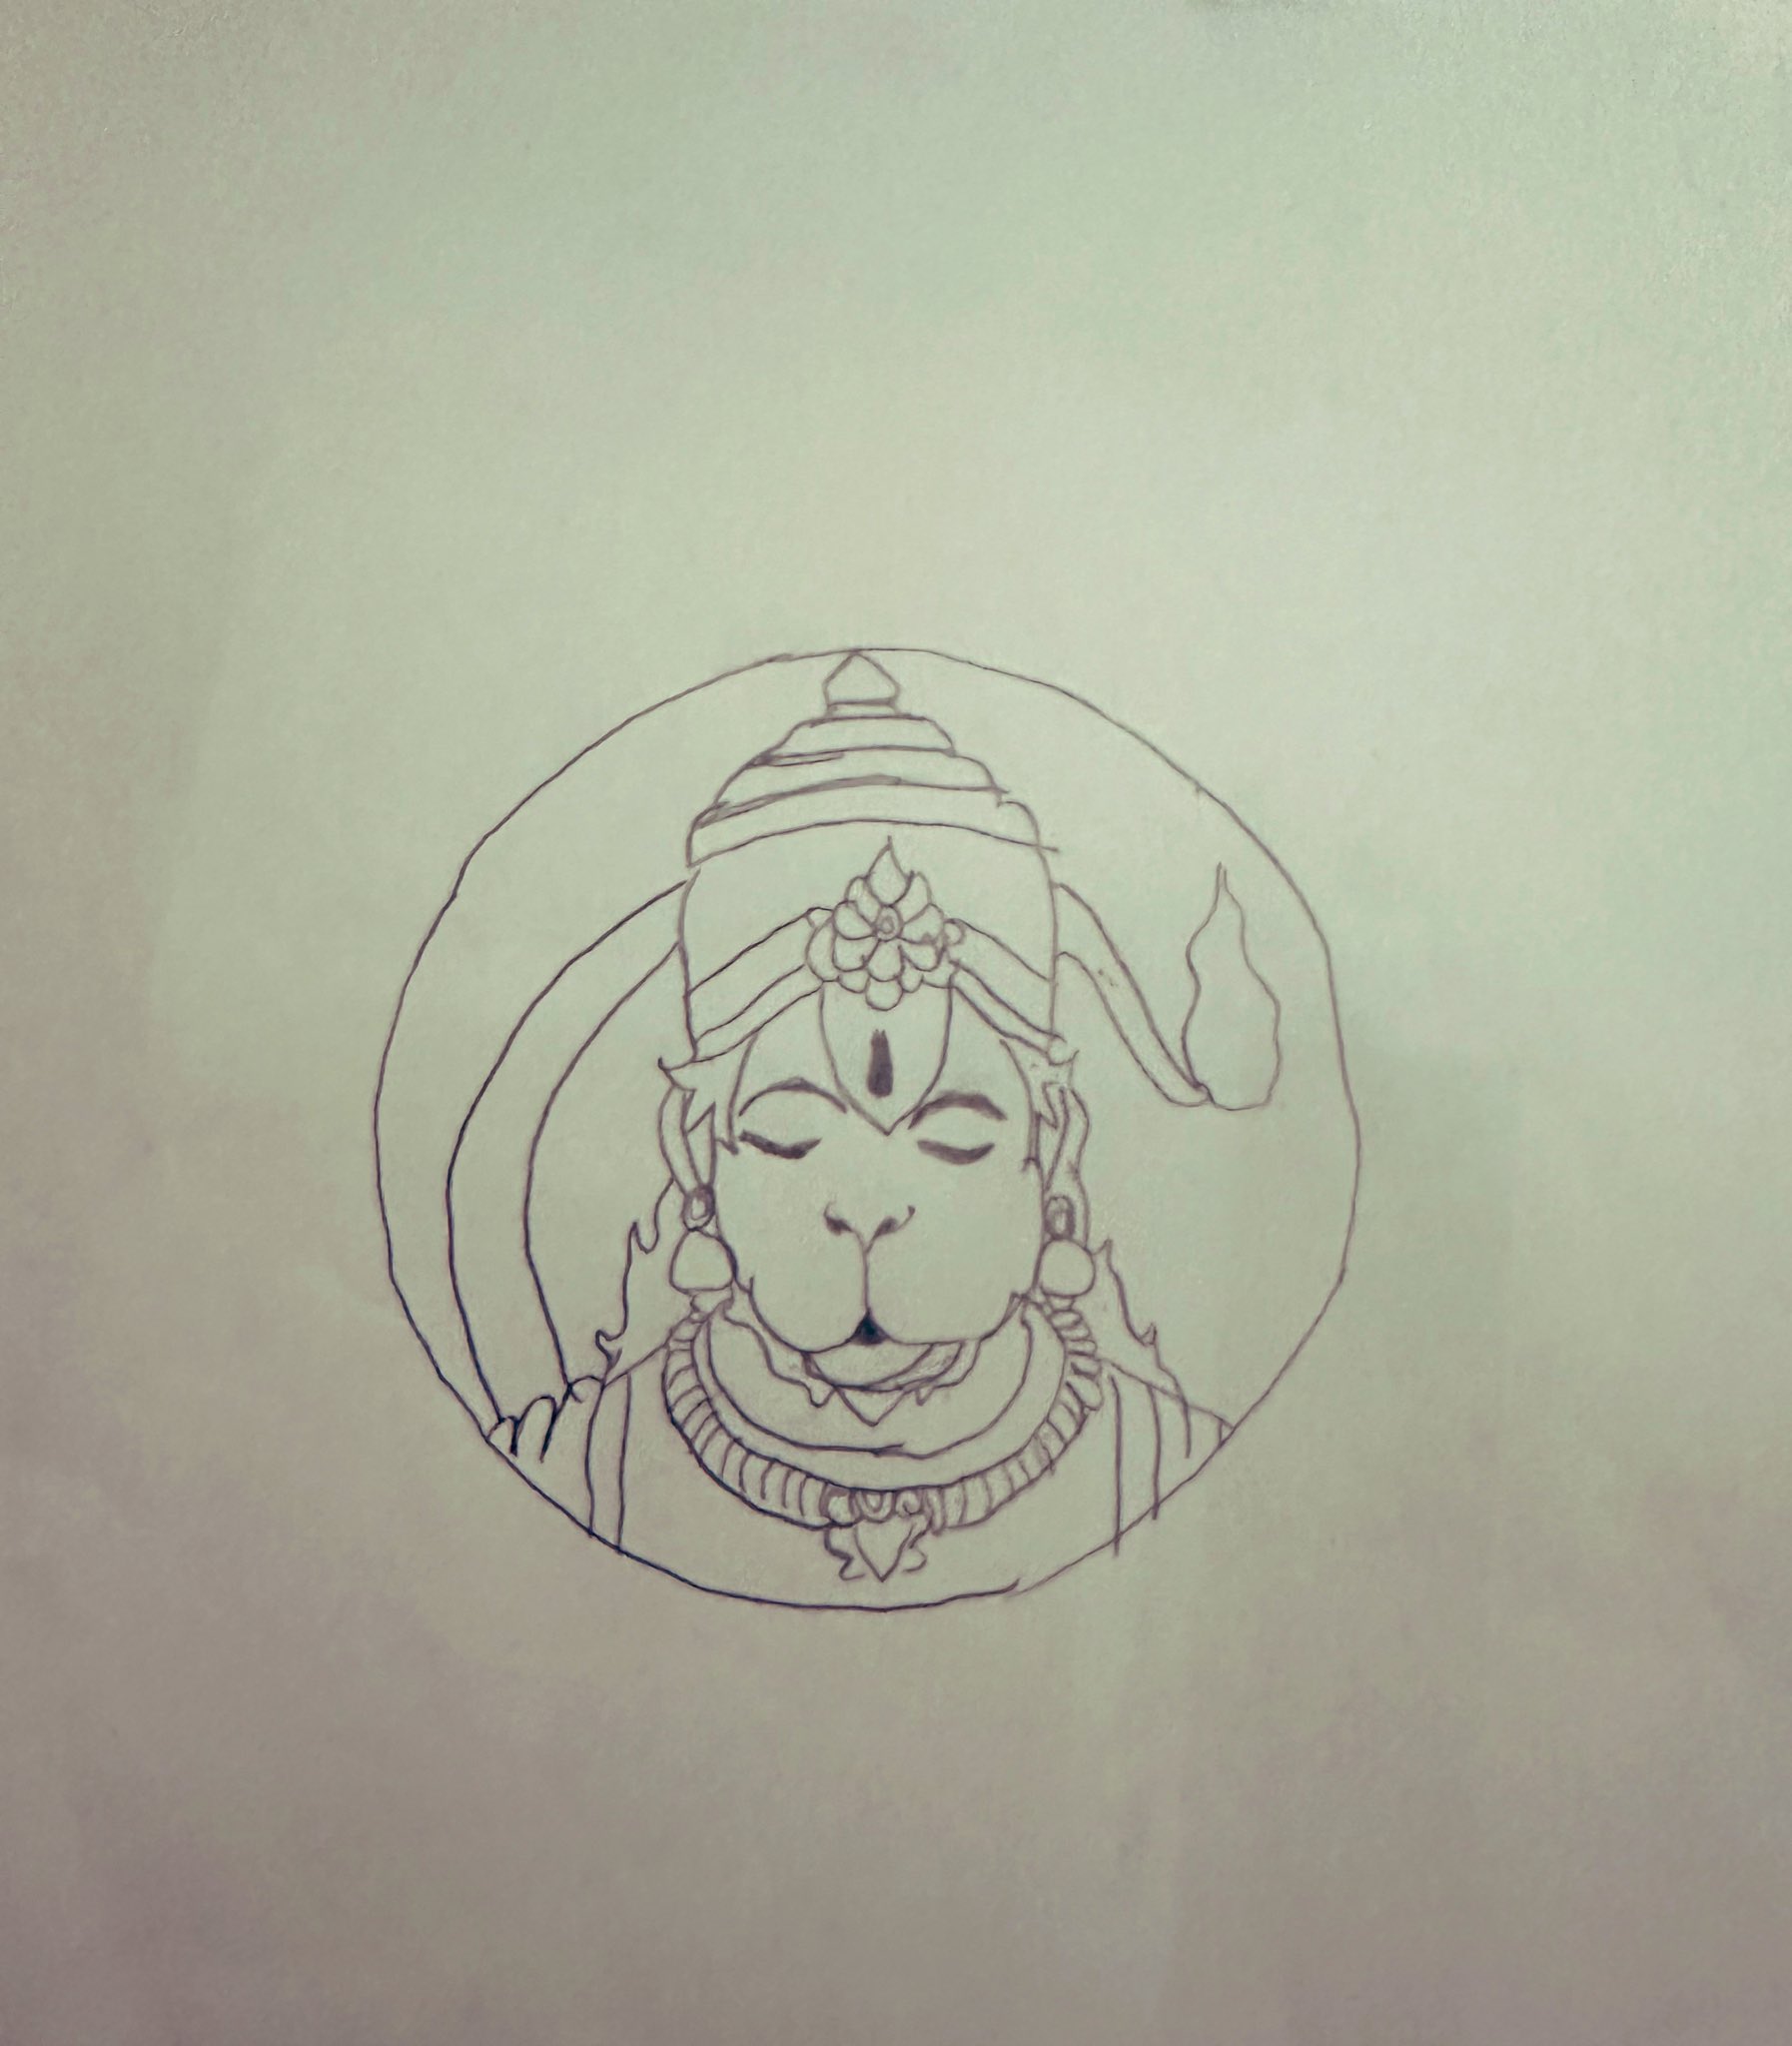 How To Draw Lord Hanuman Full Body Detail Step By Step Tutorial For  Beginners @AjArts03 - YouTube